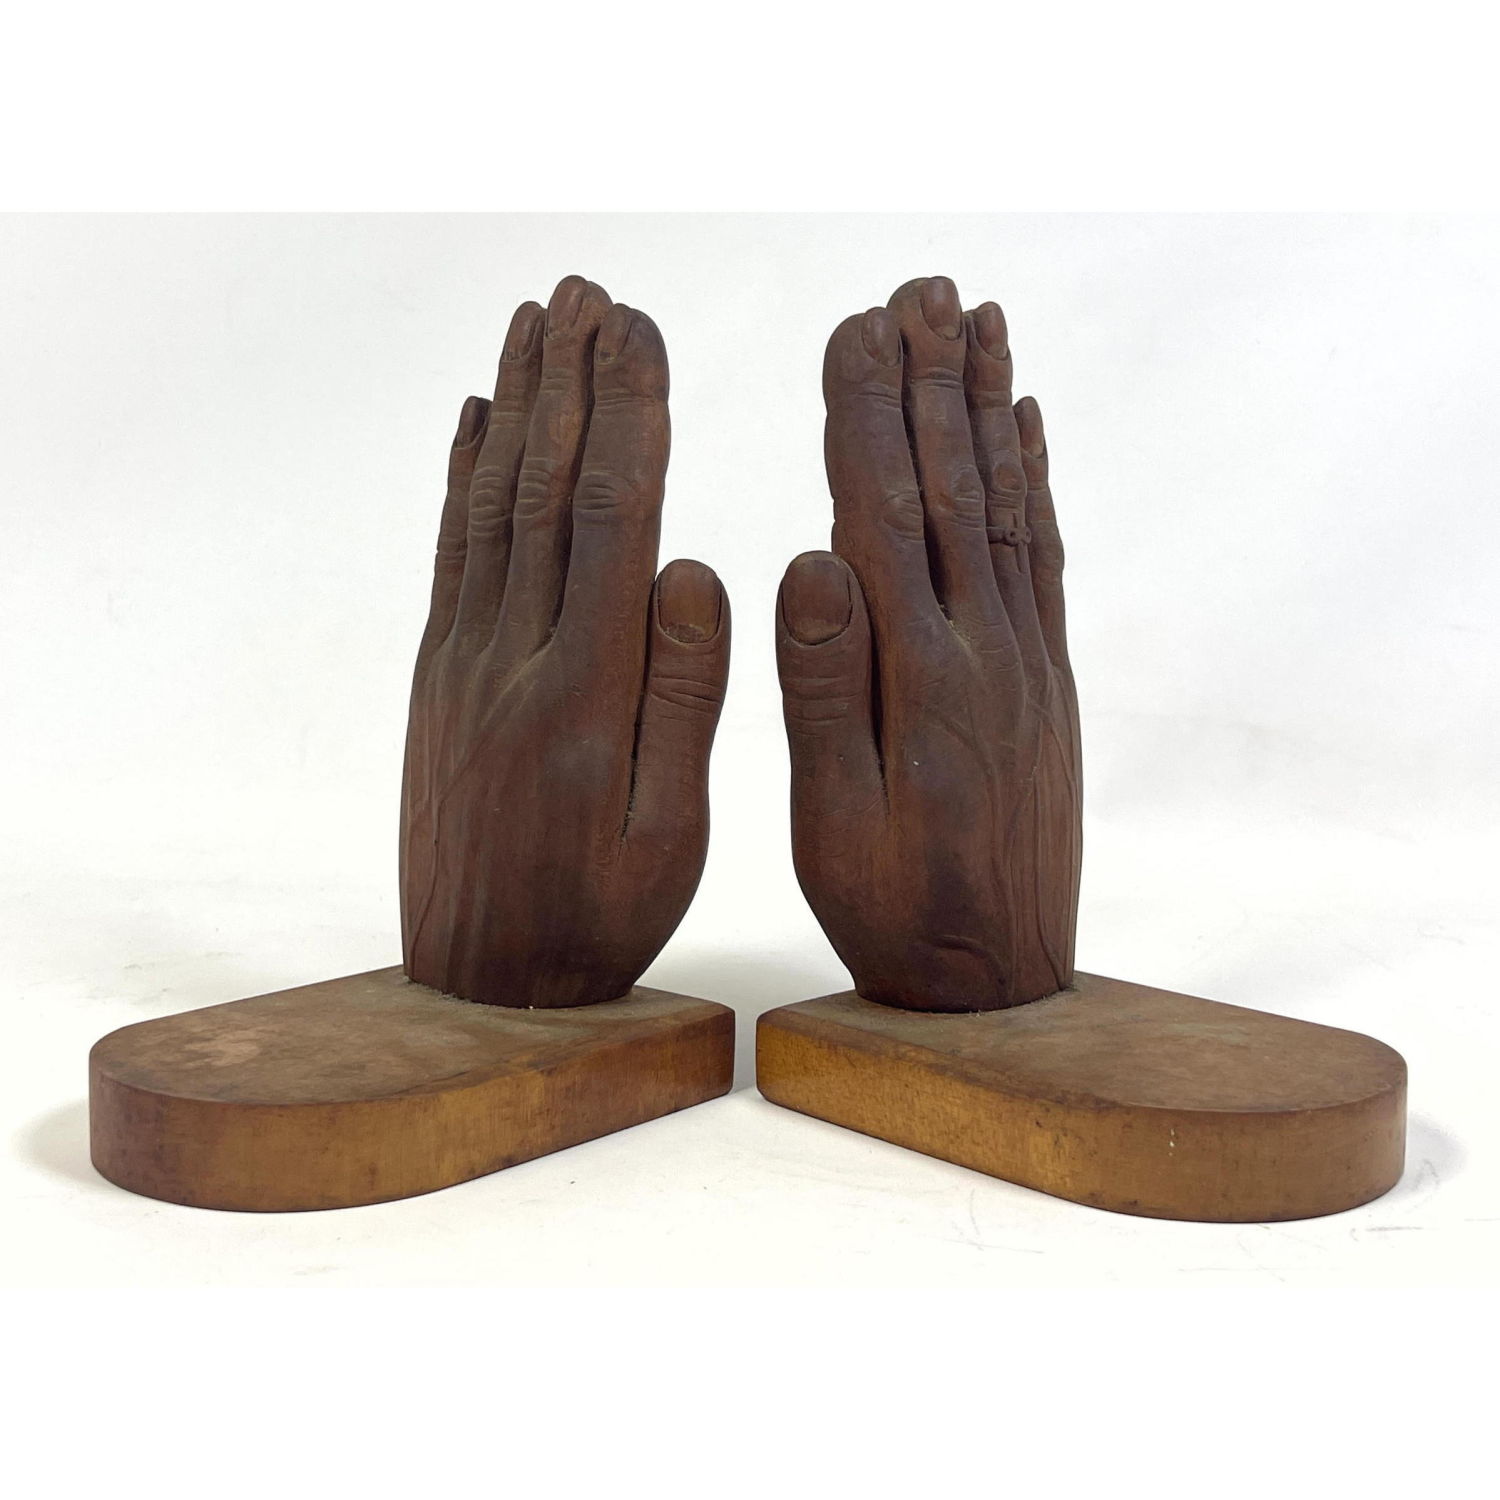 Pr Life Size Carved Wood Hand Sculpture 2b8fcd